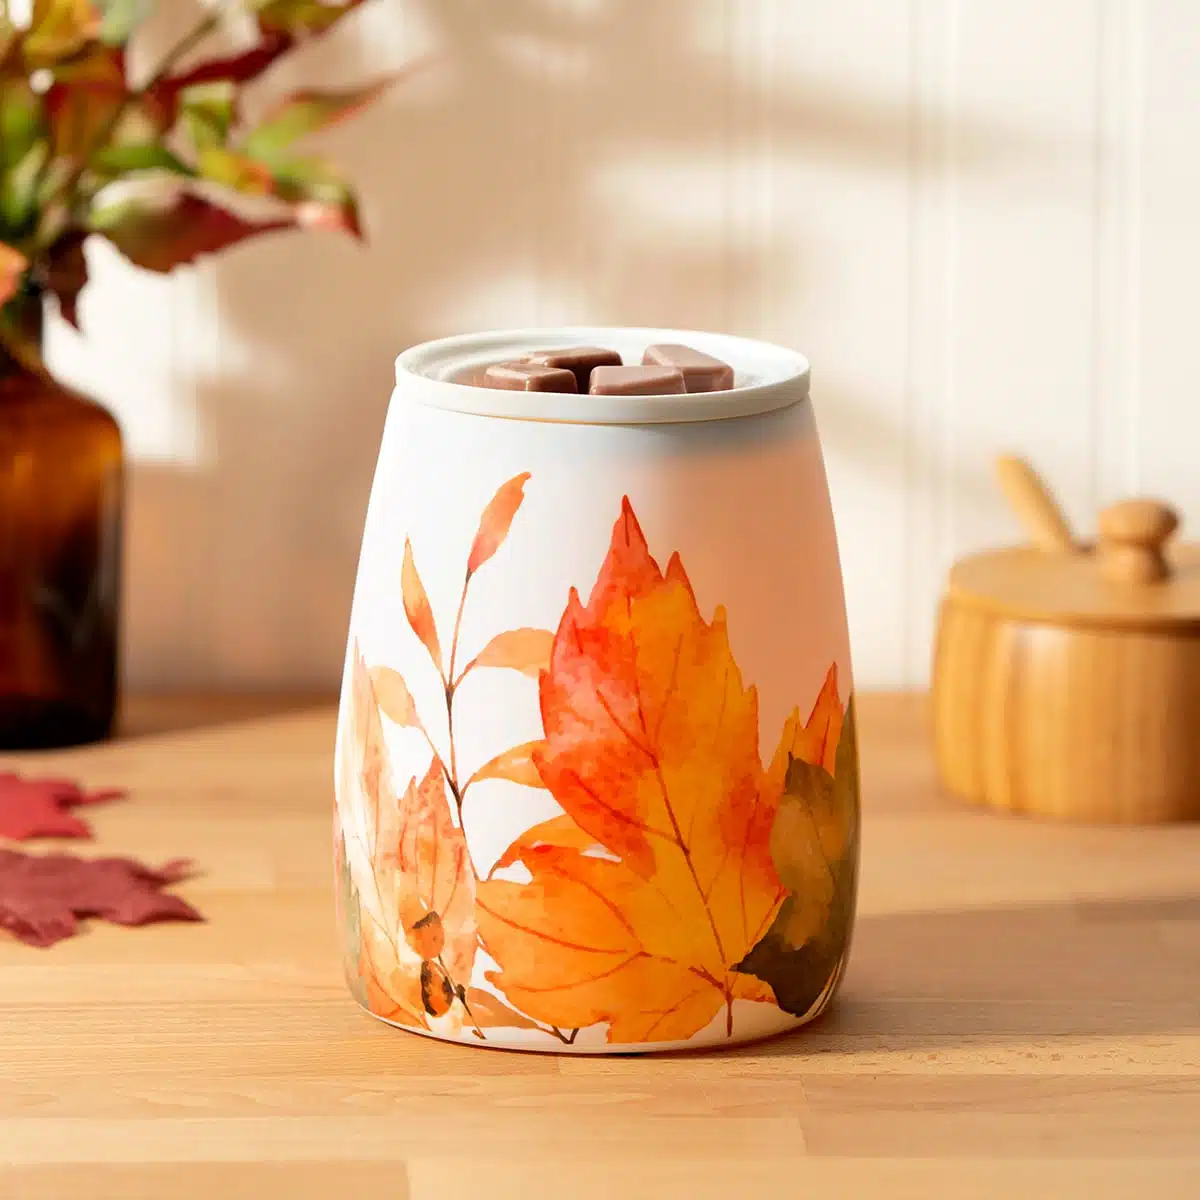 Leaves You Happy Scentsy Warmer